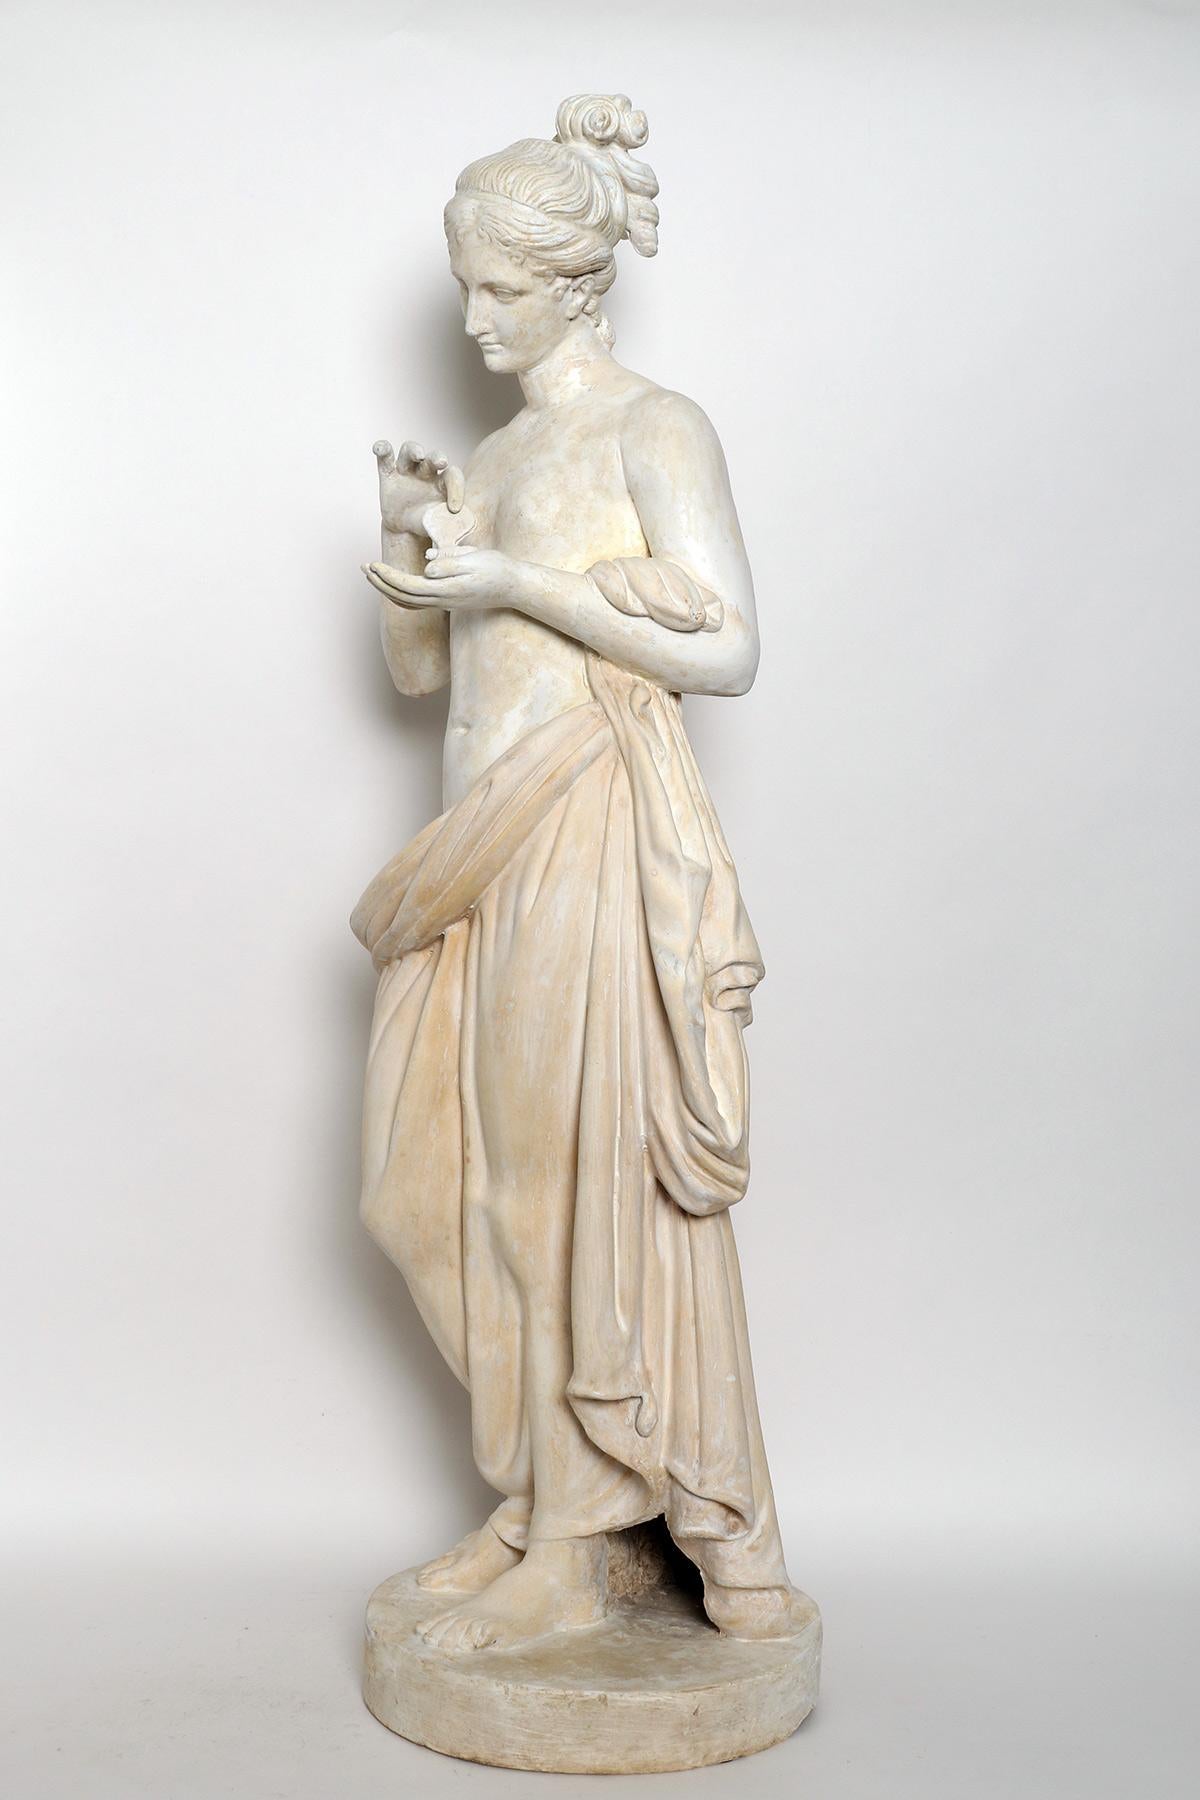 Over the plaster round base is set the cast of a sculpture of a Psyche. Plaster cast for drawing teaching in Academy. Made out of plaster and painted paper machè. Italy 1890 ca.